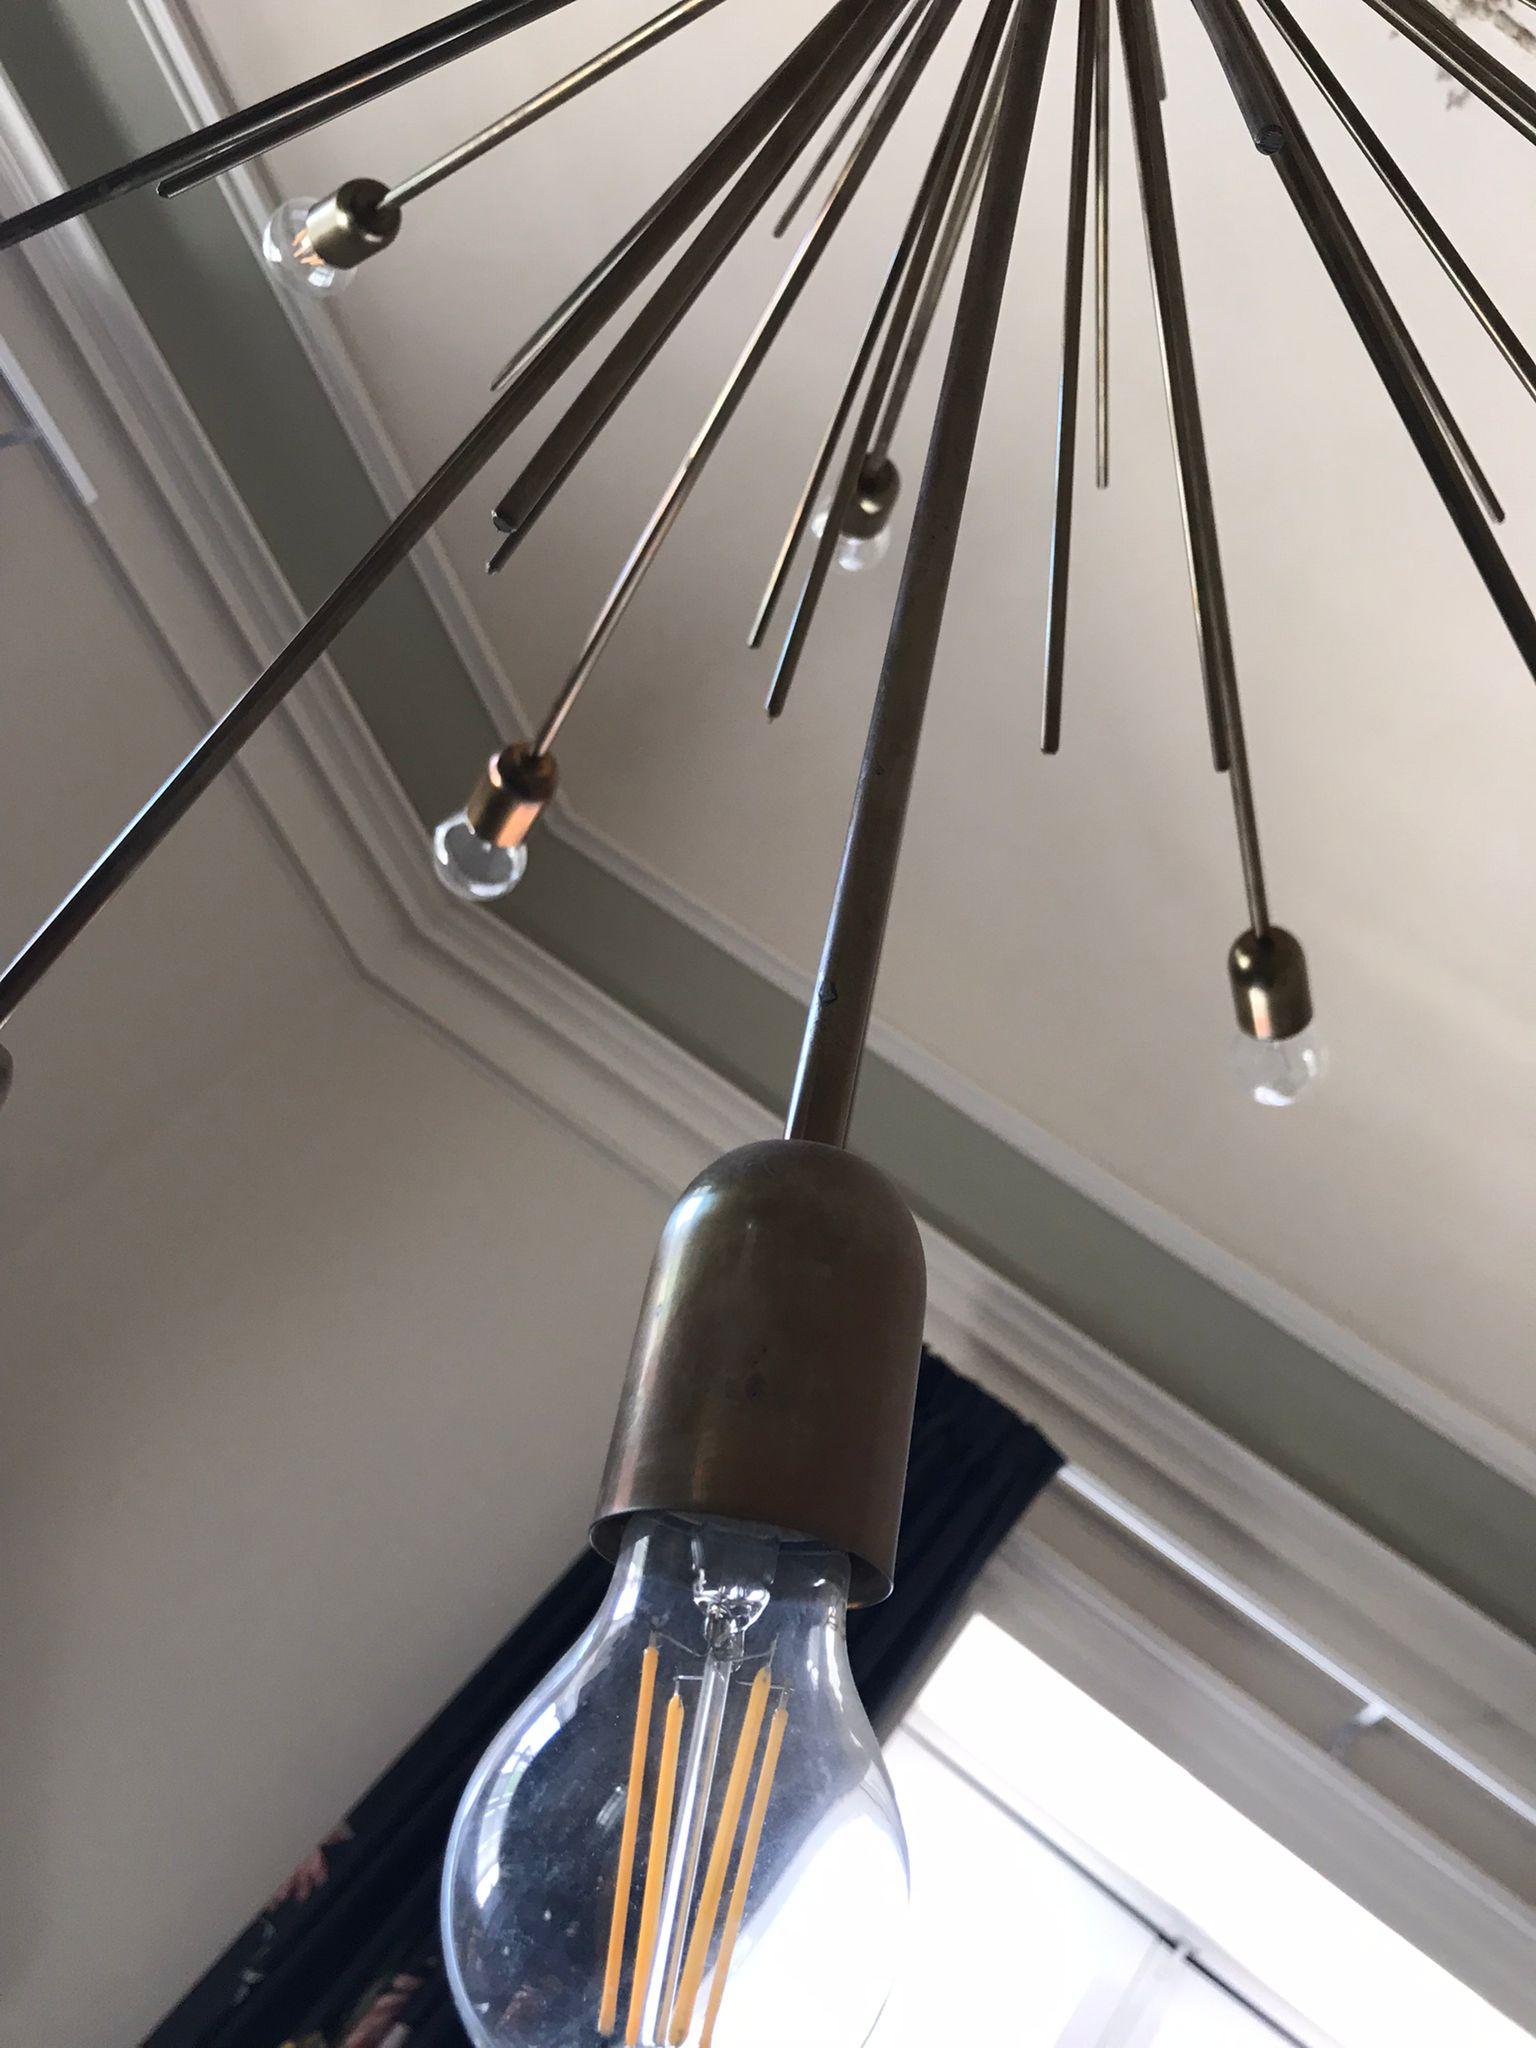 Monumental Italian Brass Sputnik Chandelier
This outstanding  Italian brass Sputnik or sea urchin chandelier is newly wired. Beautifully executed brass spears with great patina with twenty-four lights
Rod can be shortened or chandelier can be hung